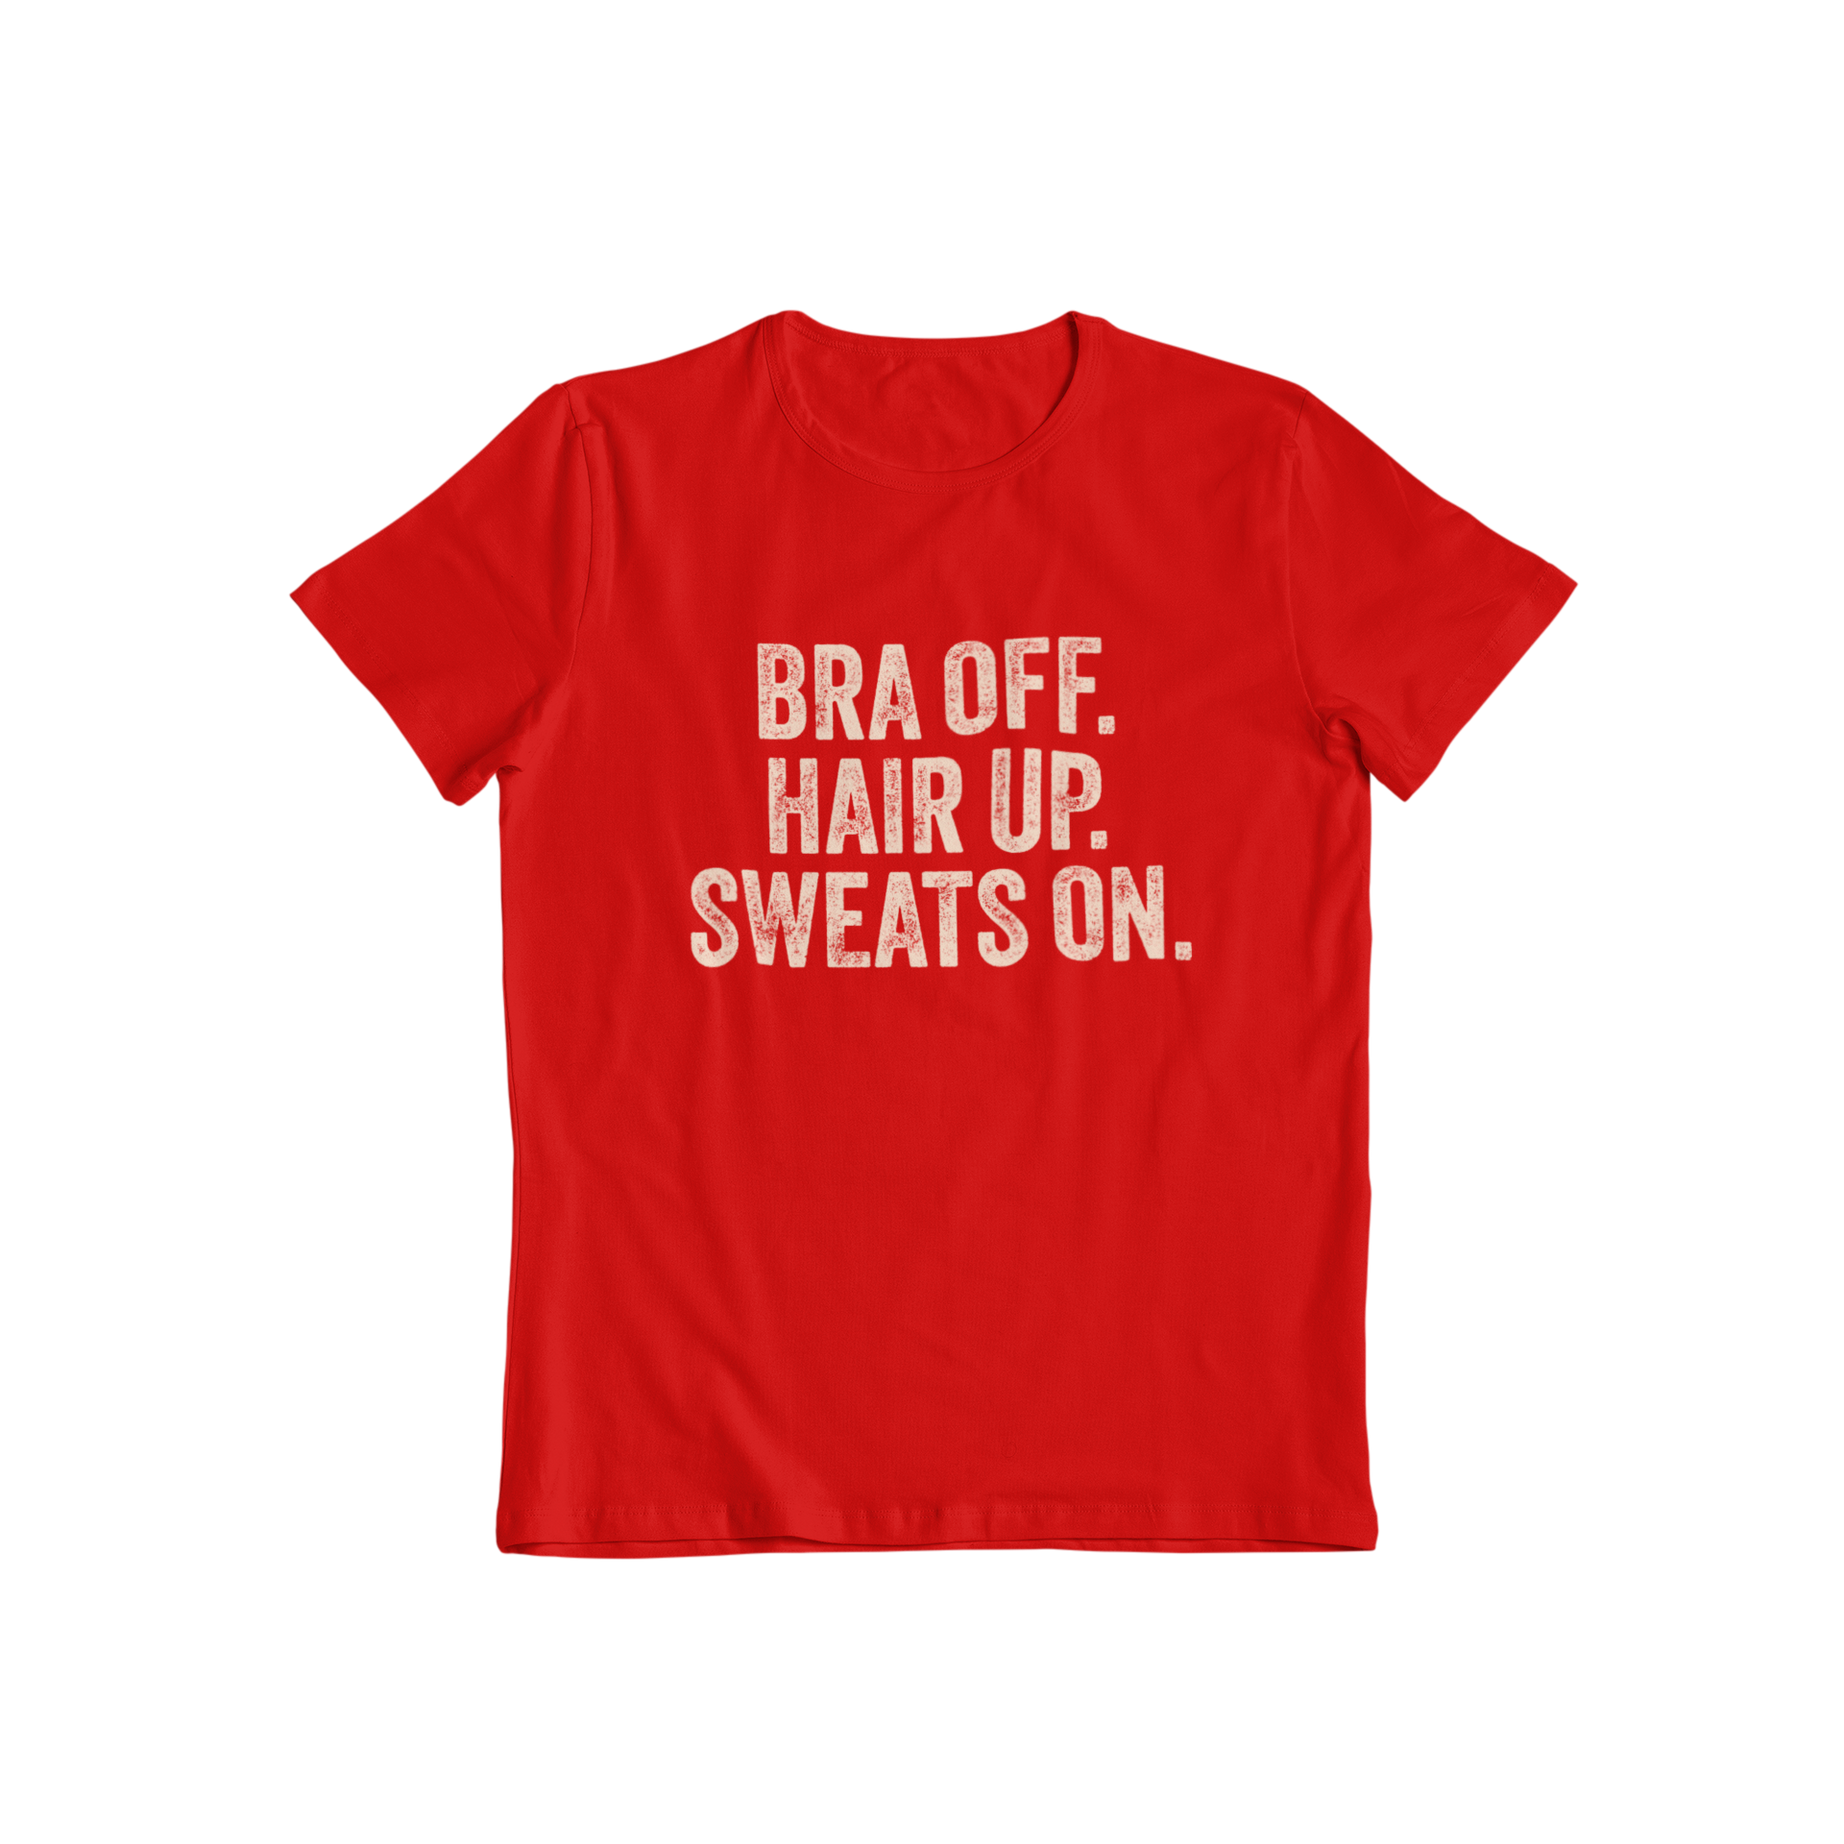 Get ready to relax in style with our Bra Off T-shirt! This classic slogan tee features an iconic phrase that every comfy gal will relate to: "bra off hair up, sweats on." Perfect for lounging or running errands, this tee will keep you comfortable and on-trend.